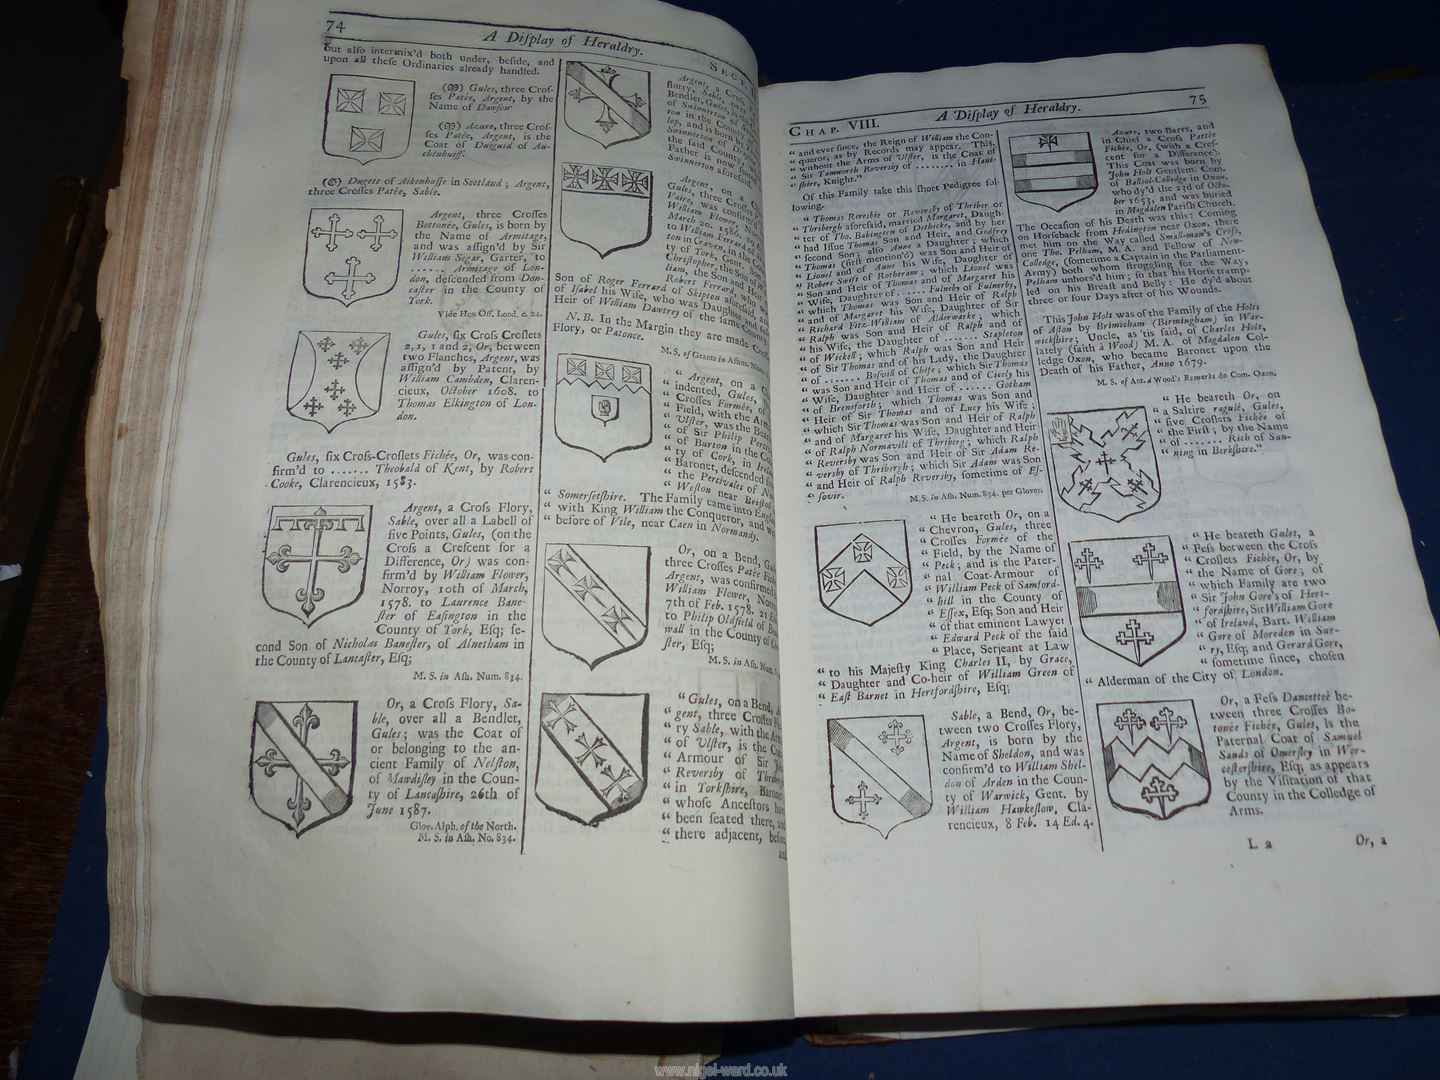 A leather bound book by John Guillim titled A Display of Heraldry, sixth edition, printed by T.W. - Image 3 of 3